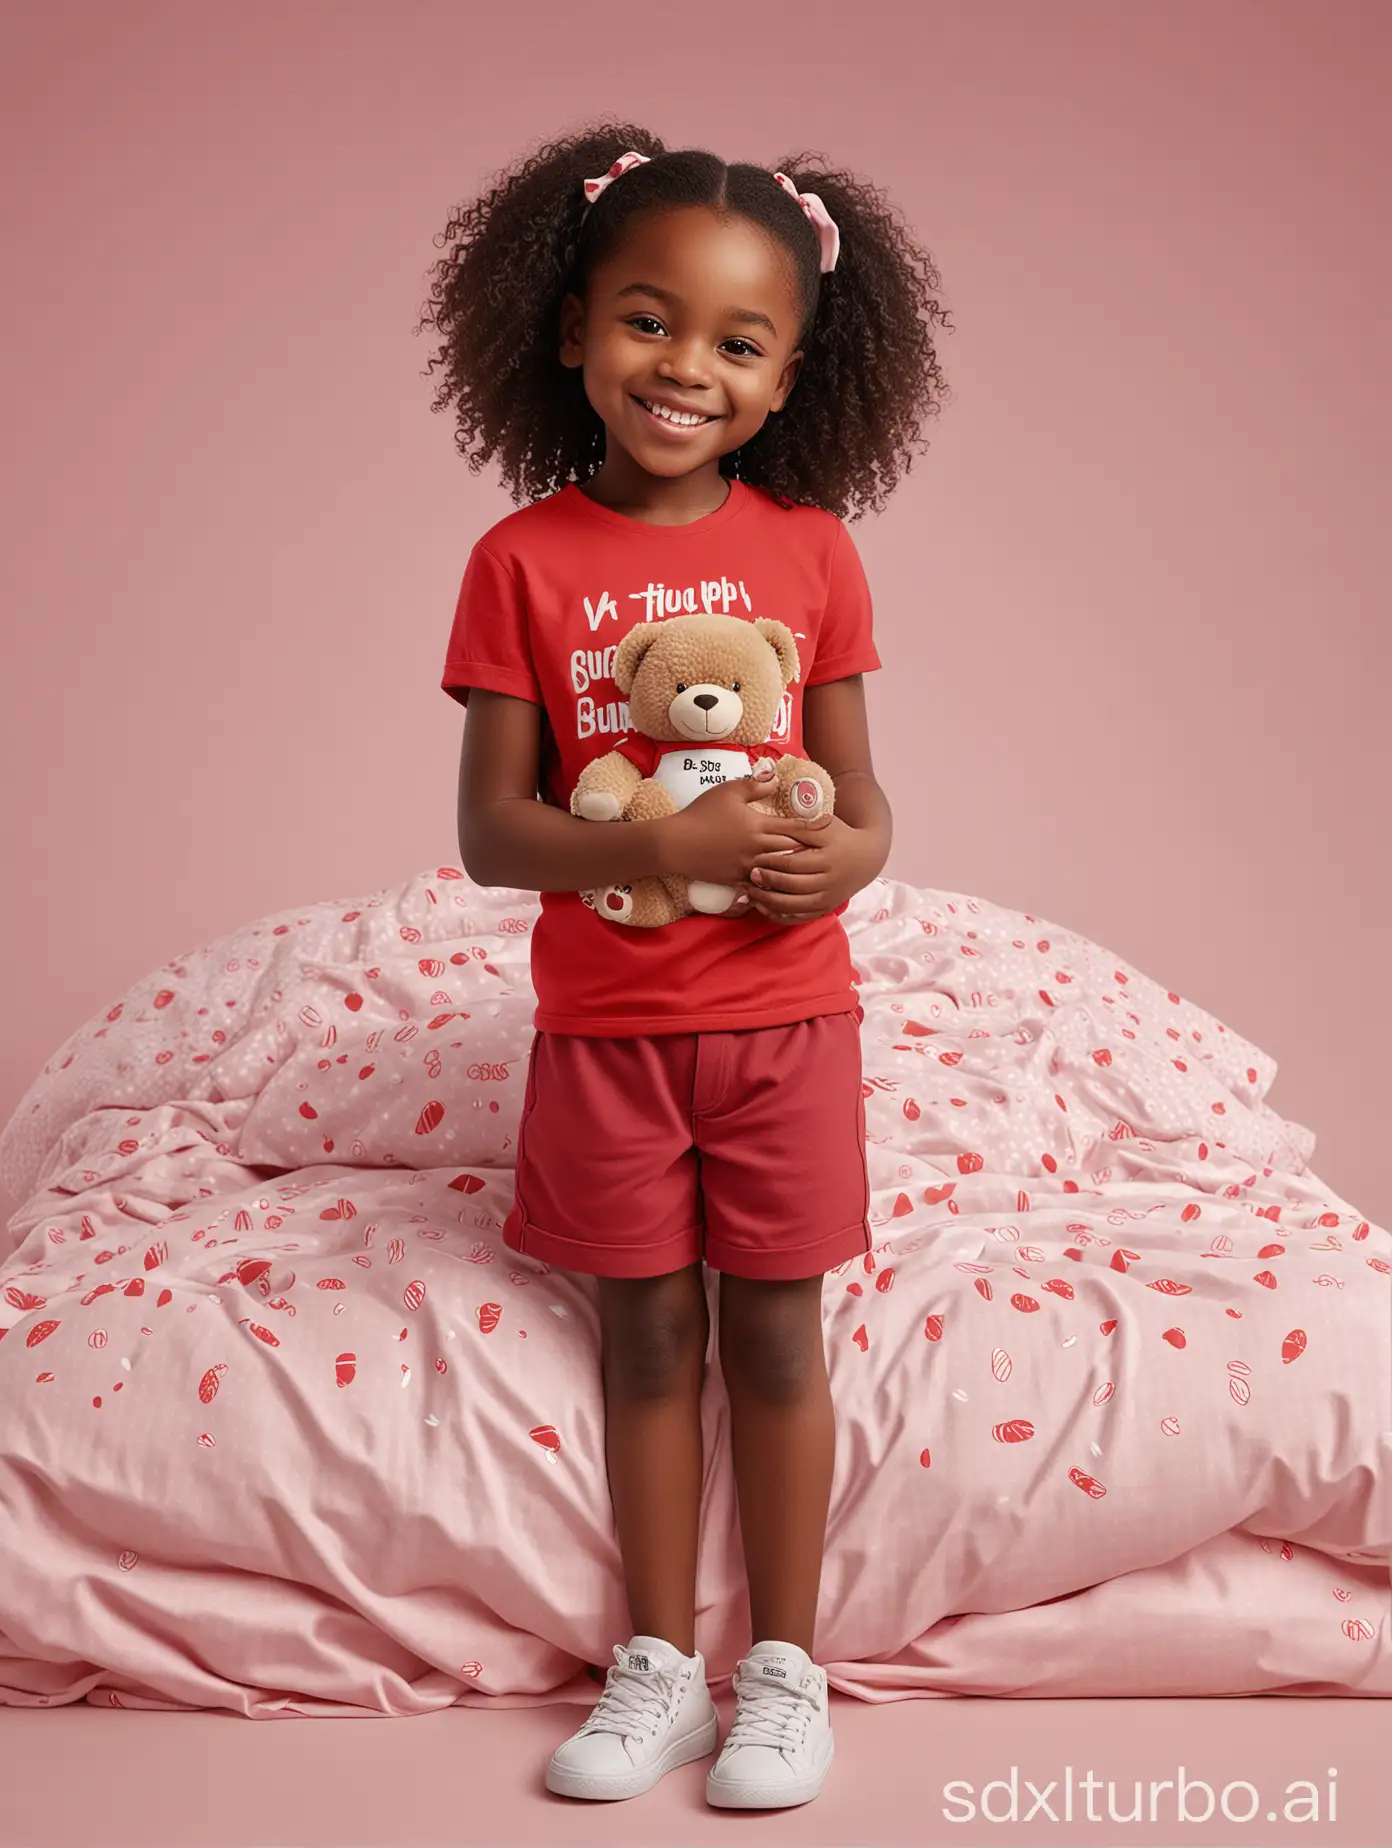 A realistic high-definition image using a life like human being meant to promote YO’ BIGGIE Premium Tissue. Main Slogan:  'soft and gentle'. Character: a 8 year old smiling cute female realistic looking african child holding cute teddy bear. the teddy bear is wearing a red t-shirt with the name biggie writen on it. the child is playing on a soft cotton bed with a cloudy background with floating feathers, plus powder pink background. Colour theme: red and white. Within the image, a standard size roll of YO’ BIGGIE Premium Tissue. Subtitle: 'Luxury, Softness, Meets Surprising Strength'